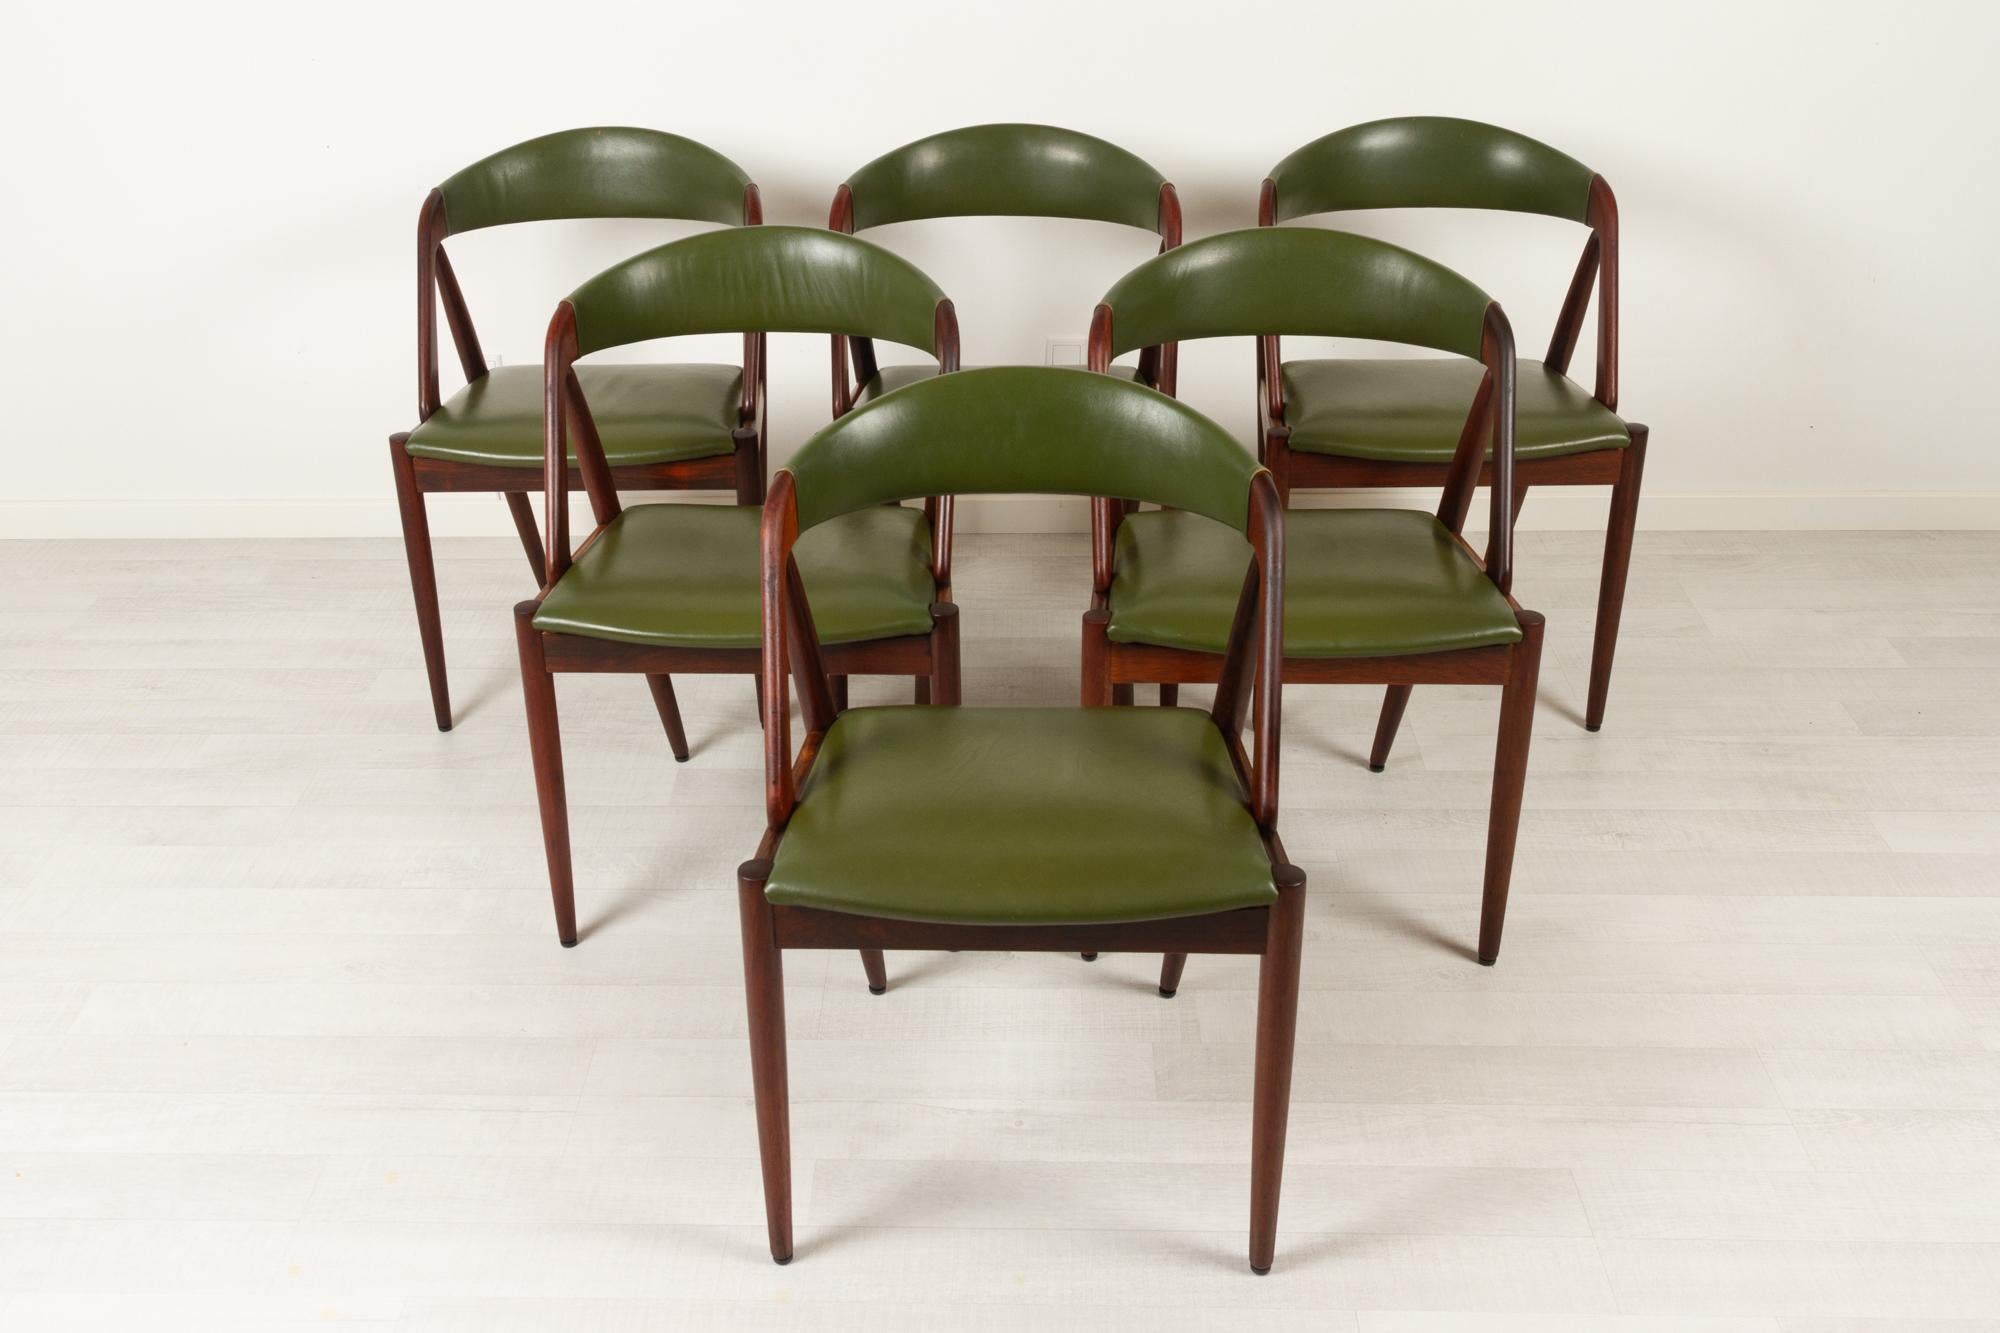 Danish modern rosewood dining chairs model 31 by Kai Kristiansen for Schou Andersen, Denmark 1960s, Set of 6
Set of Danish Mid-Century Modern dining room chairs in solid Rosewood. Upholstered with beautiful original green leather which is very rare